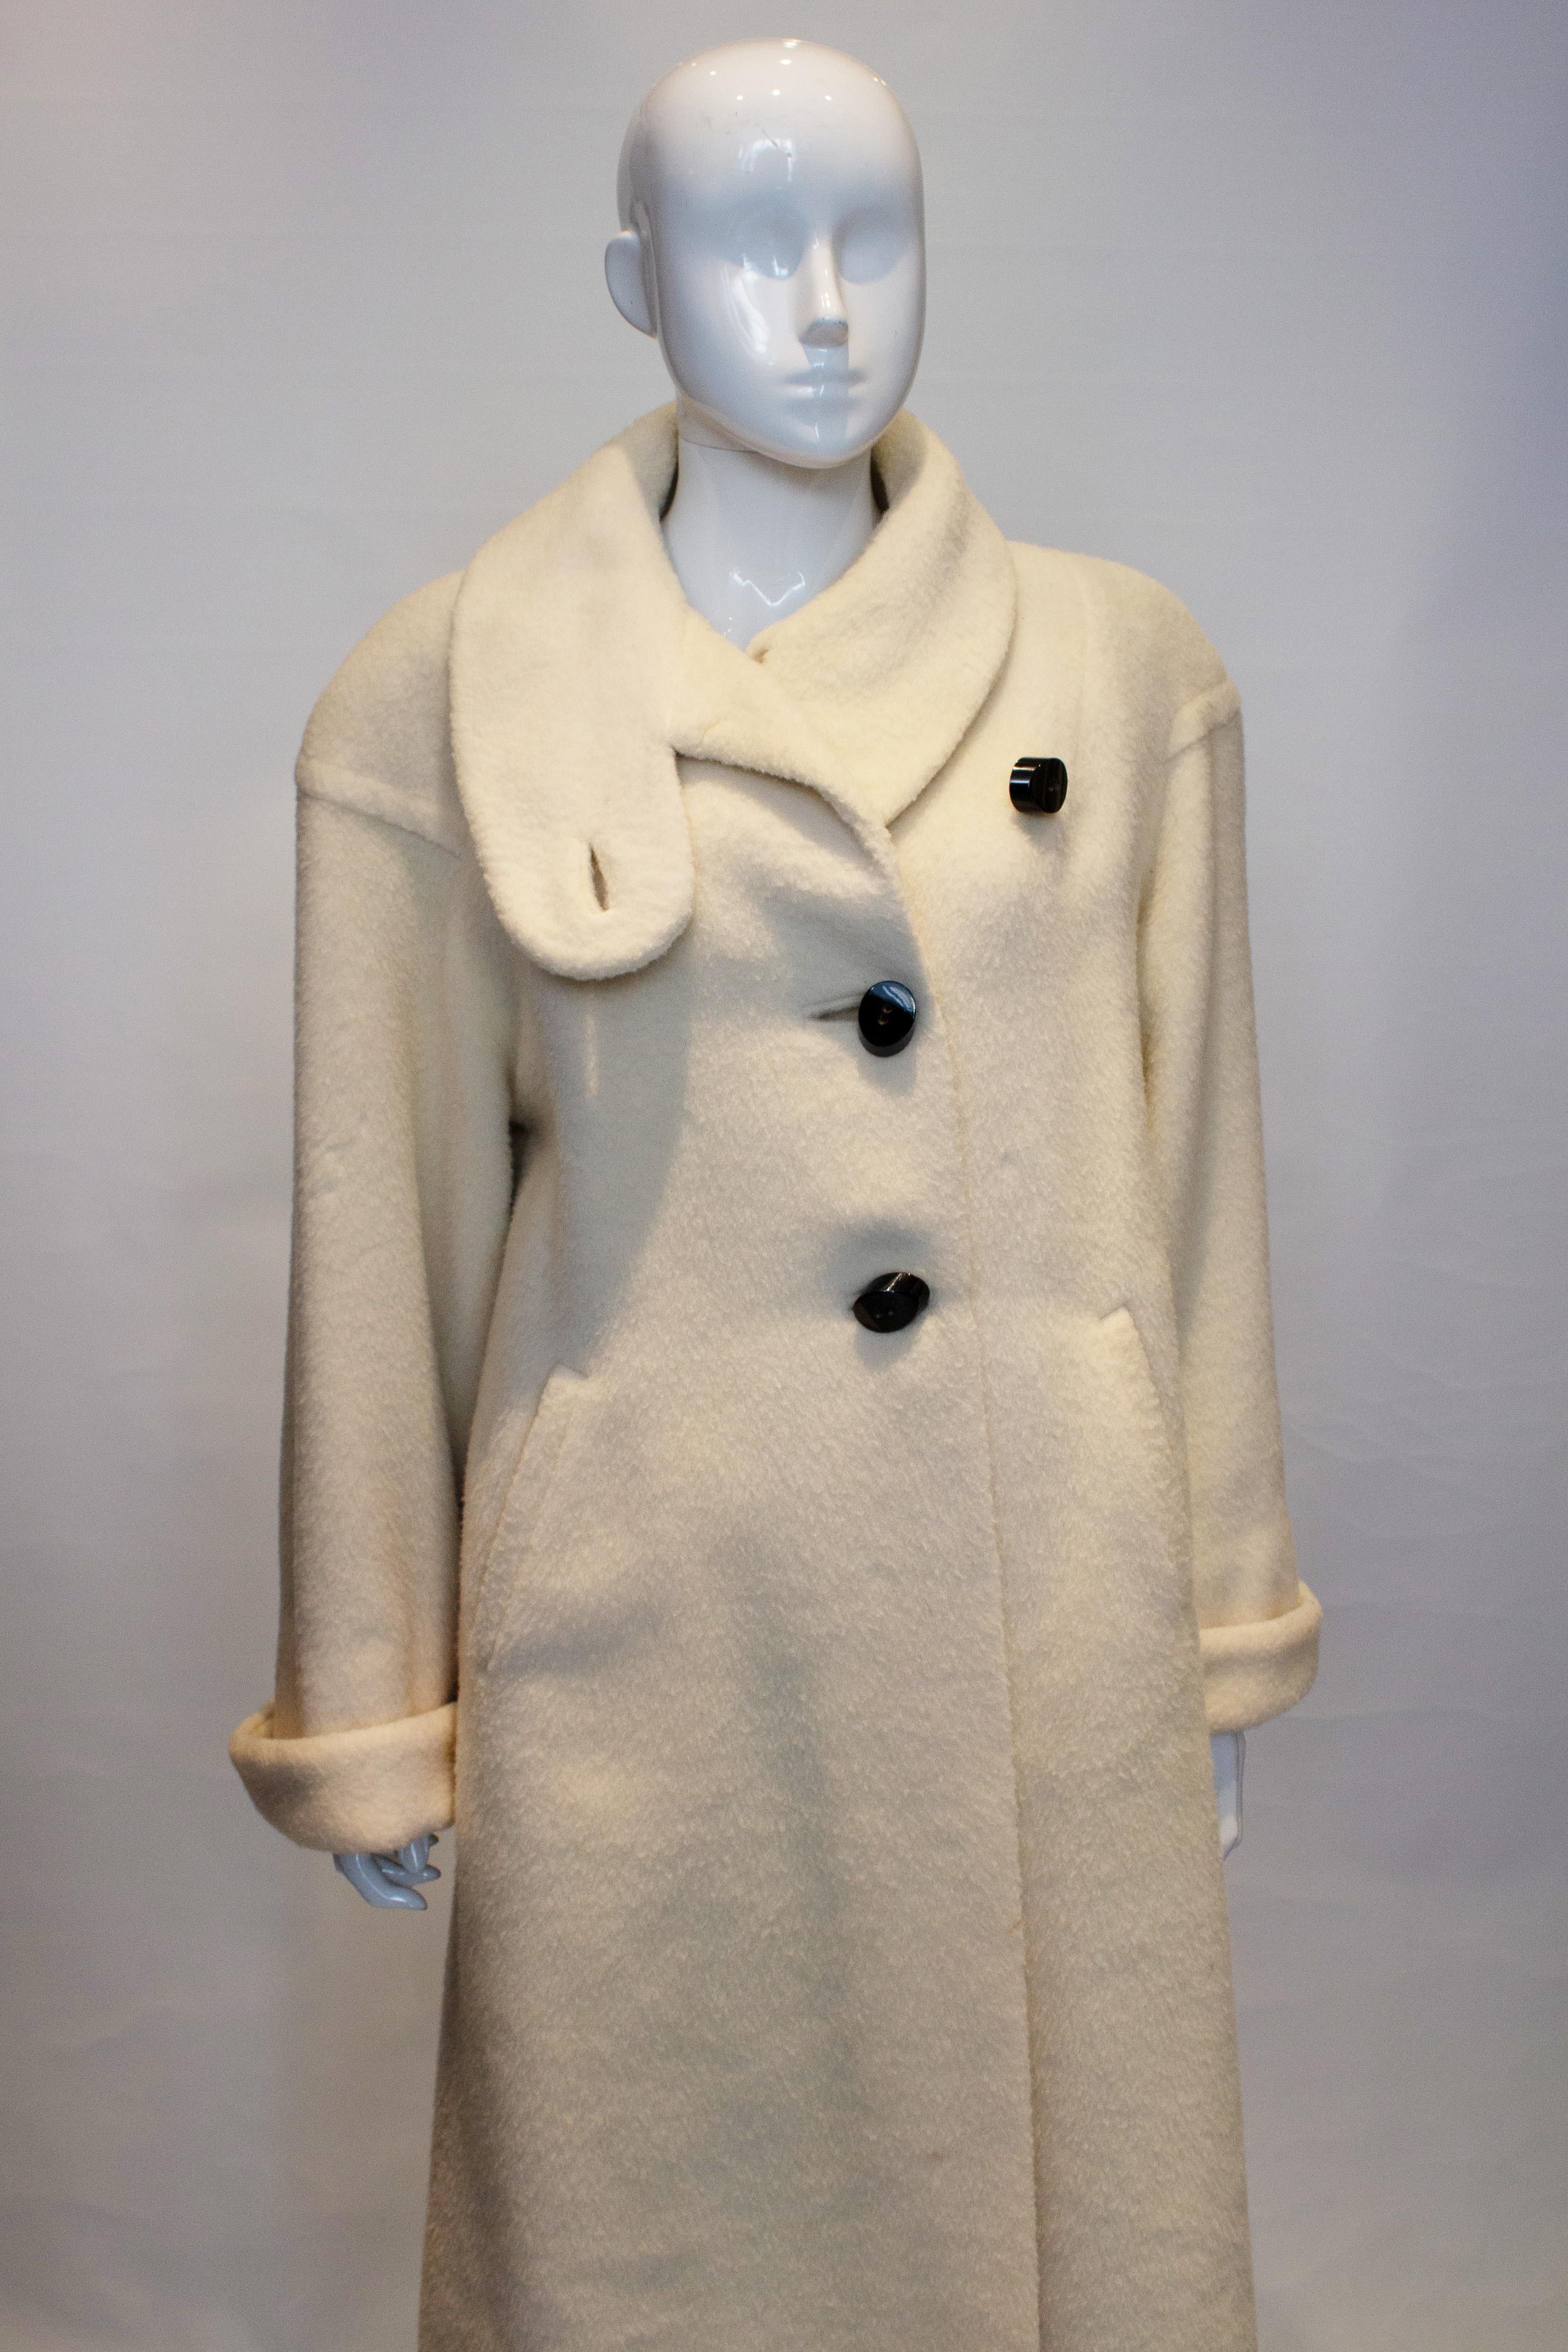 A wonderful vintage white coat with wonderful oversize buttons. The coat has a stand up collar, pockets on either side and turn back cuffs. It is fully lined.
Measurements bust up to 46'', length 48''